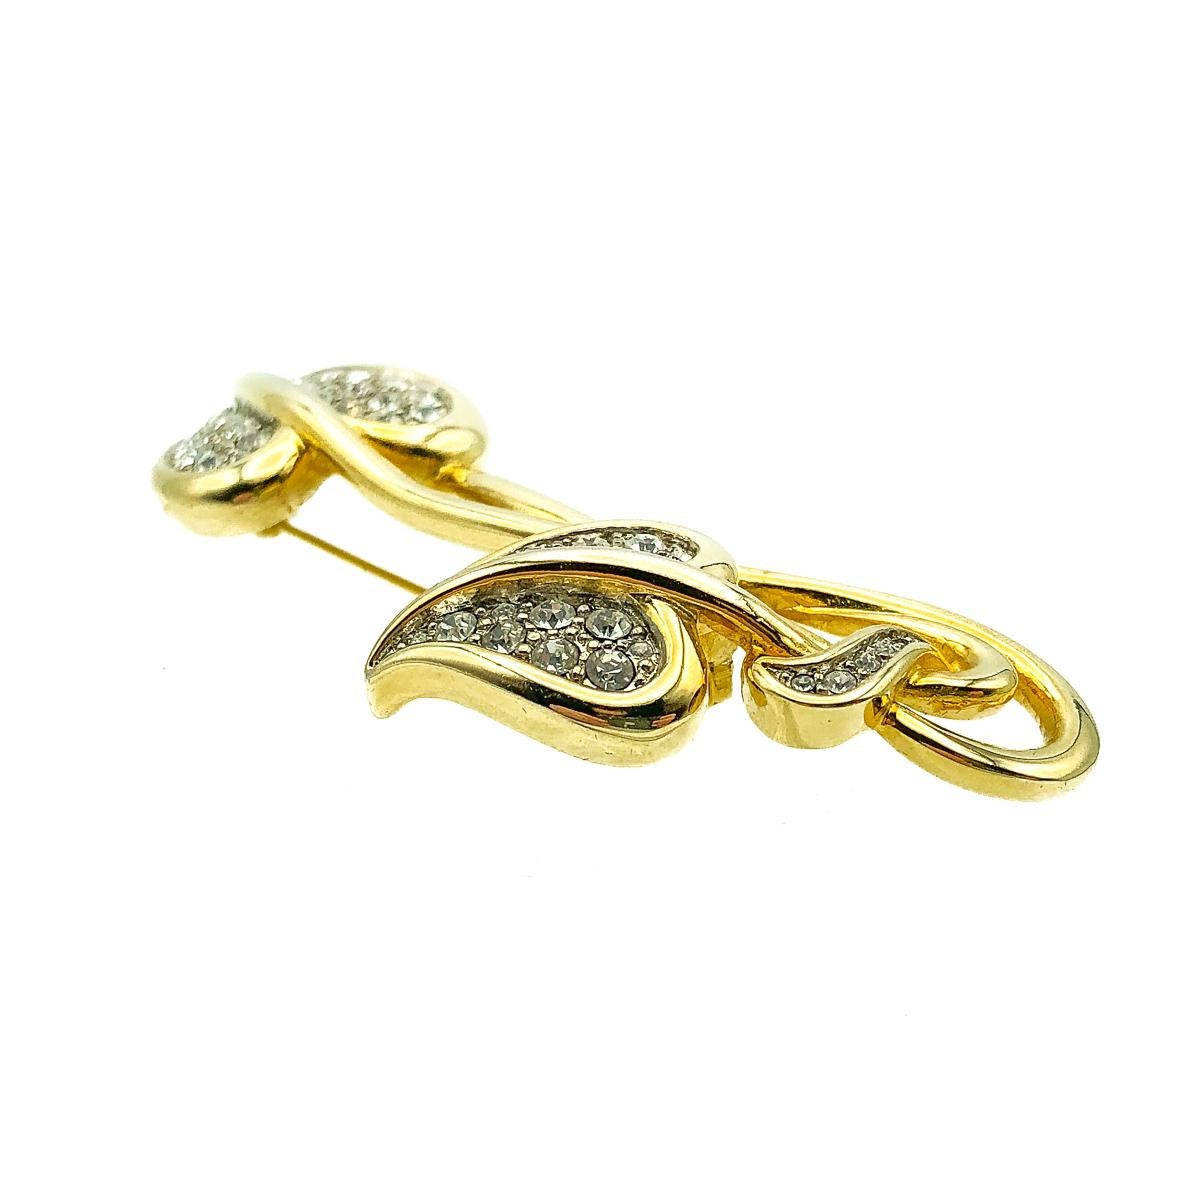 A long and delightfully stylish Vintage Art Nouveau Ivy Brooch. Featuring a double ended trail of ivy encrusted with pave set rhinestones. 
Vintage Condition: Very good without damage or noteworthy wear. 
Materials: Gold plated meta, glass